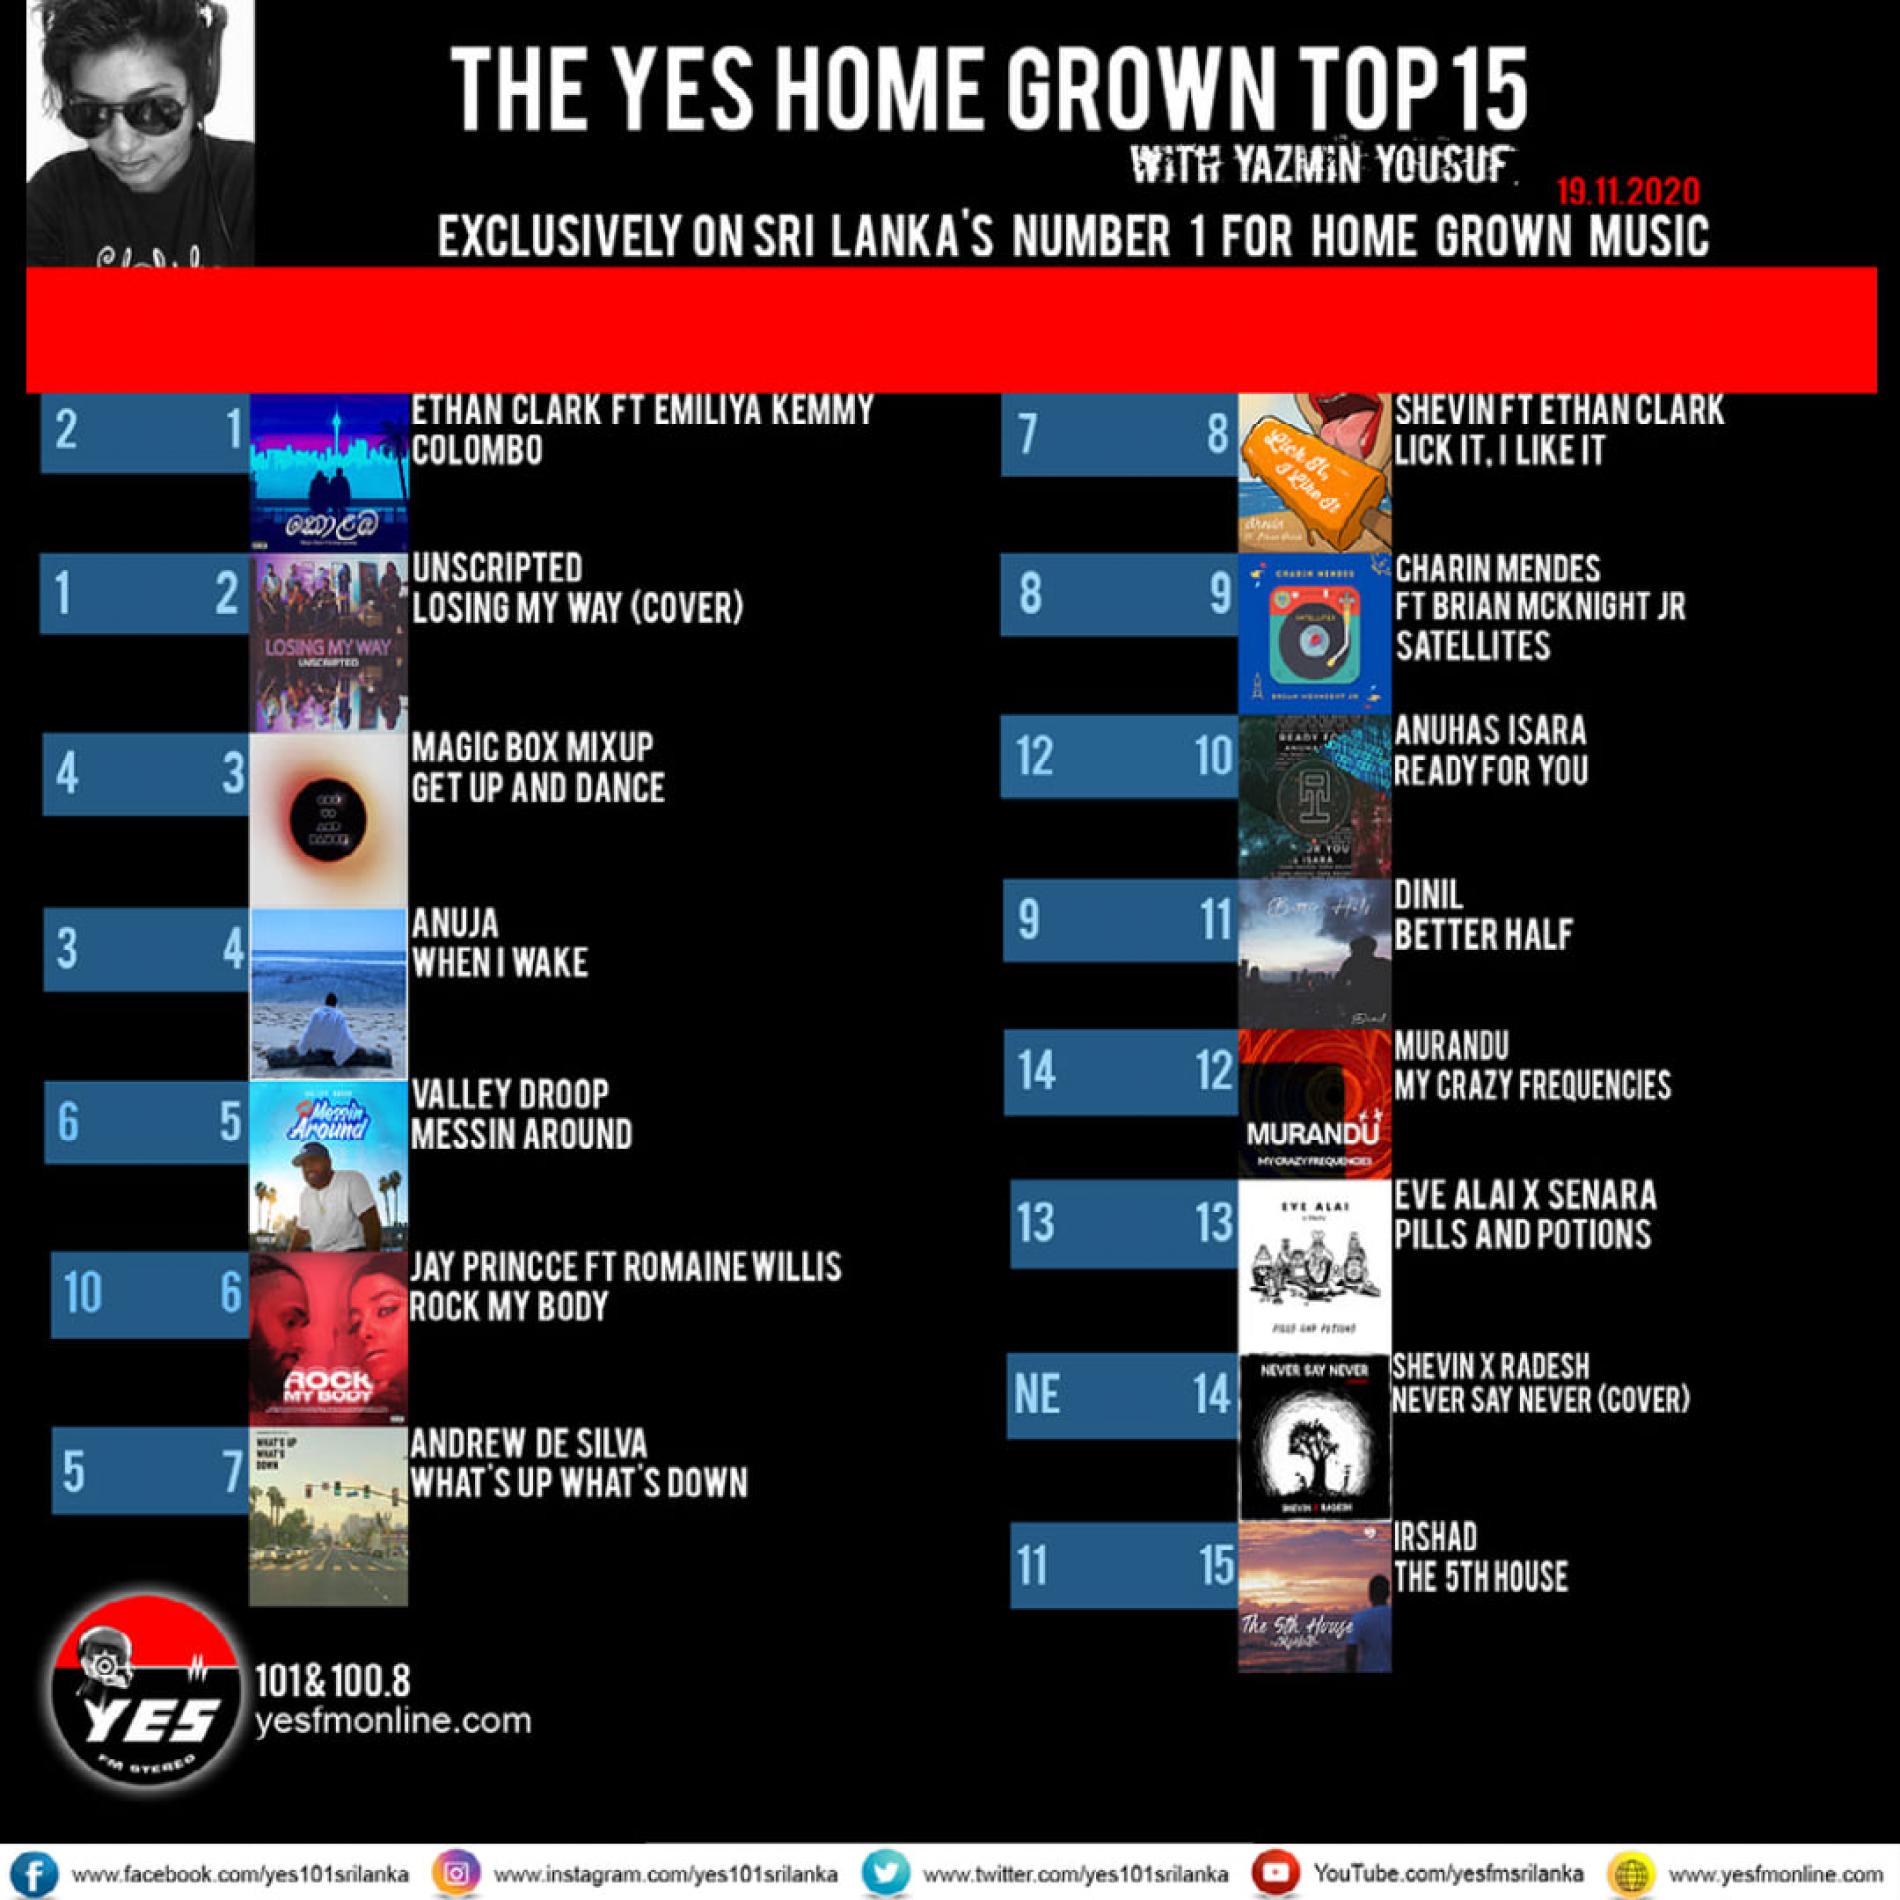 News : Ethan Clark & Emiliya Kemmy Hit Number 1 On The YES Home Grown Top 15!